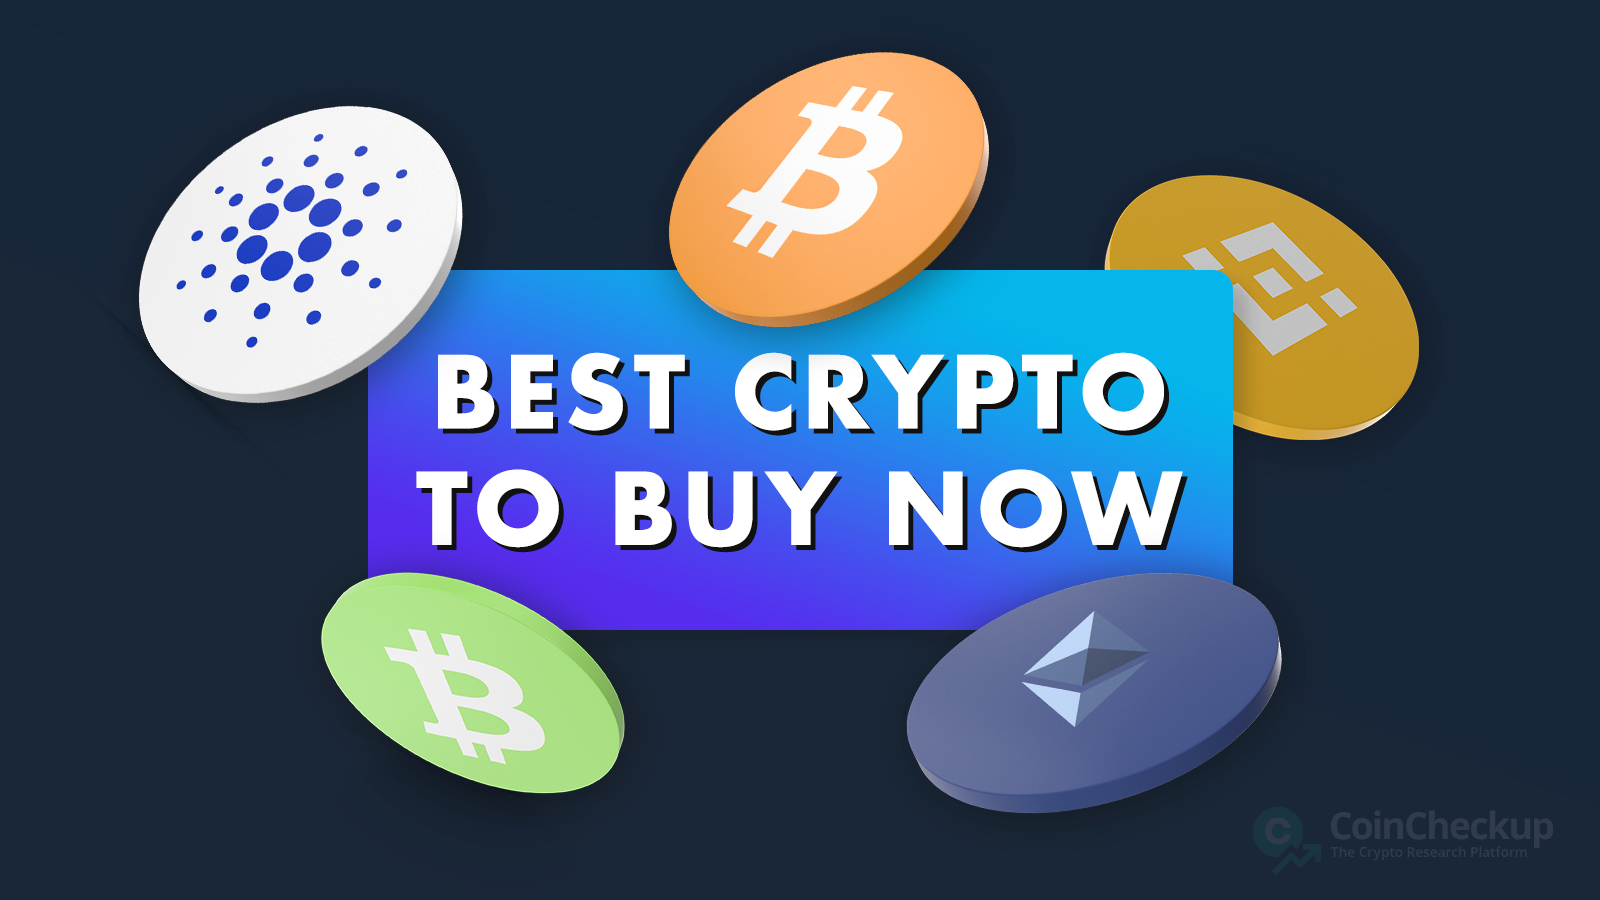 12 Best Crypto to Buy Now in February | CoinCodex